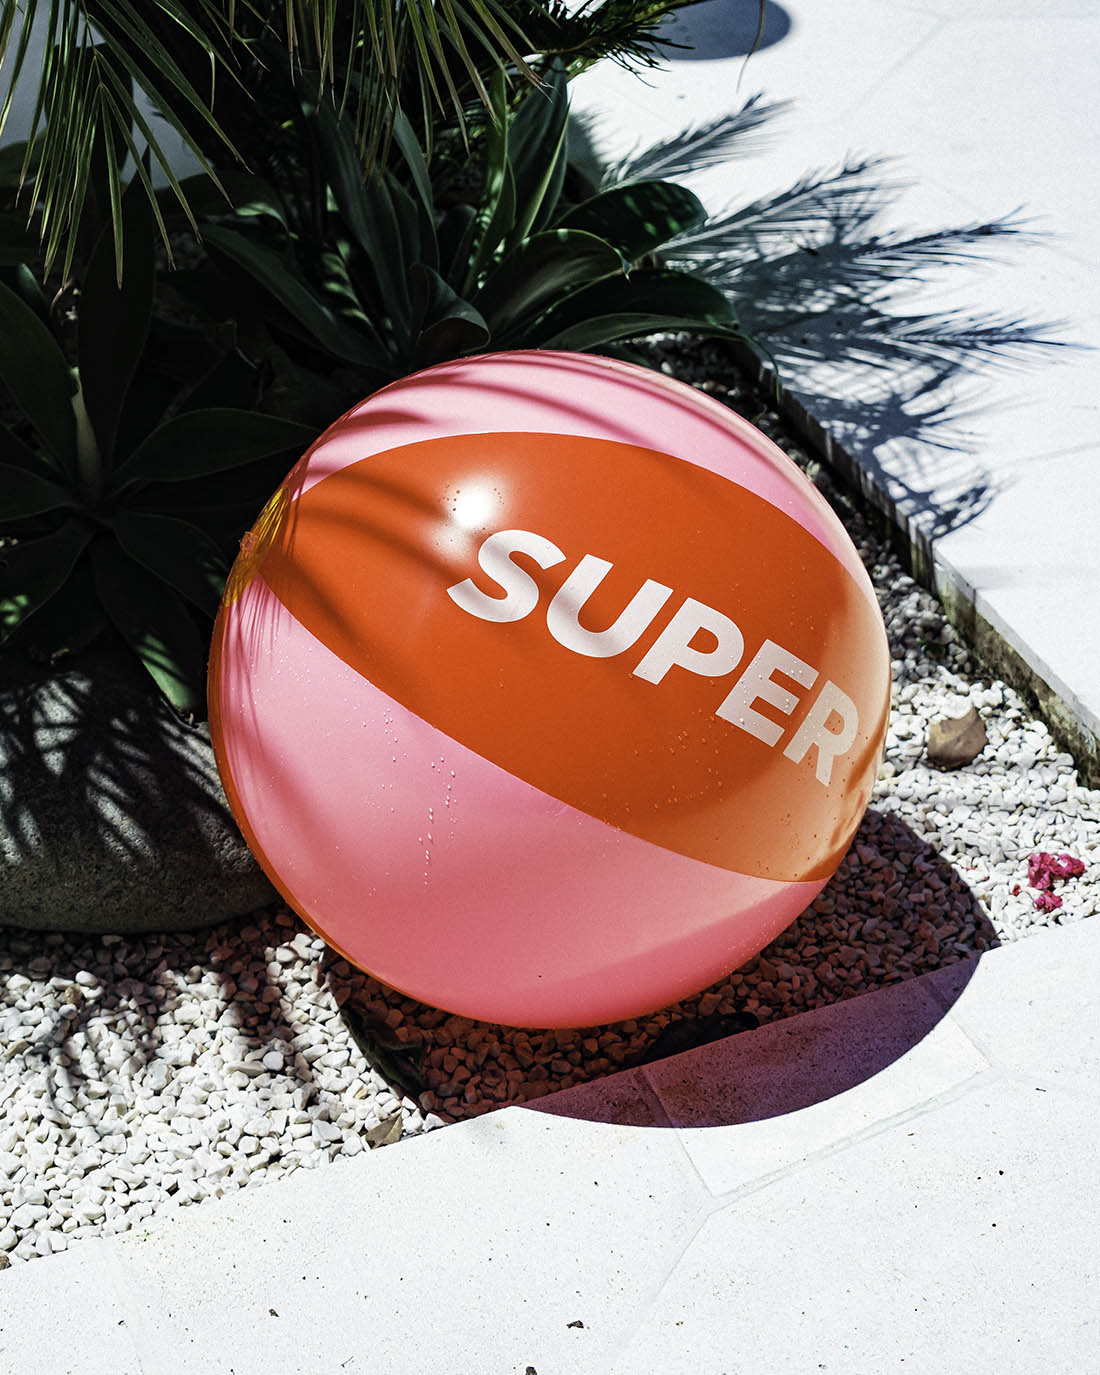 Beach ball with solid red and pink design.